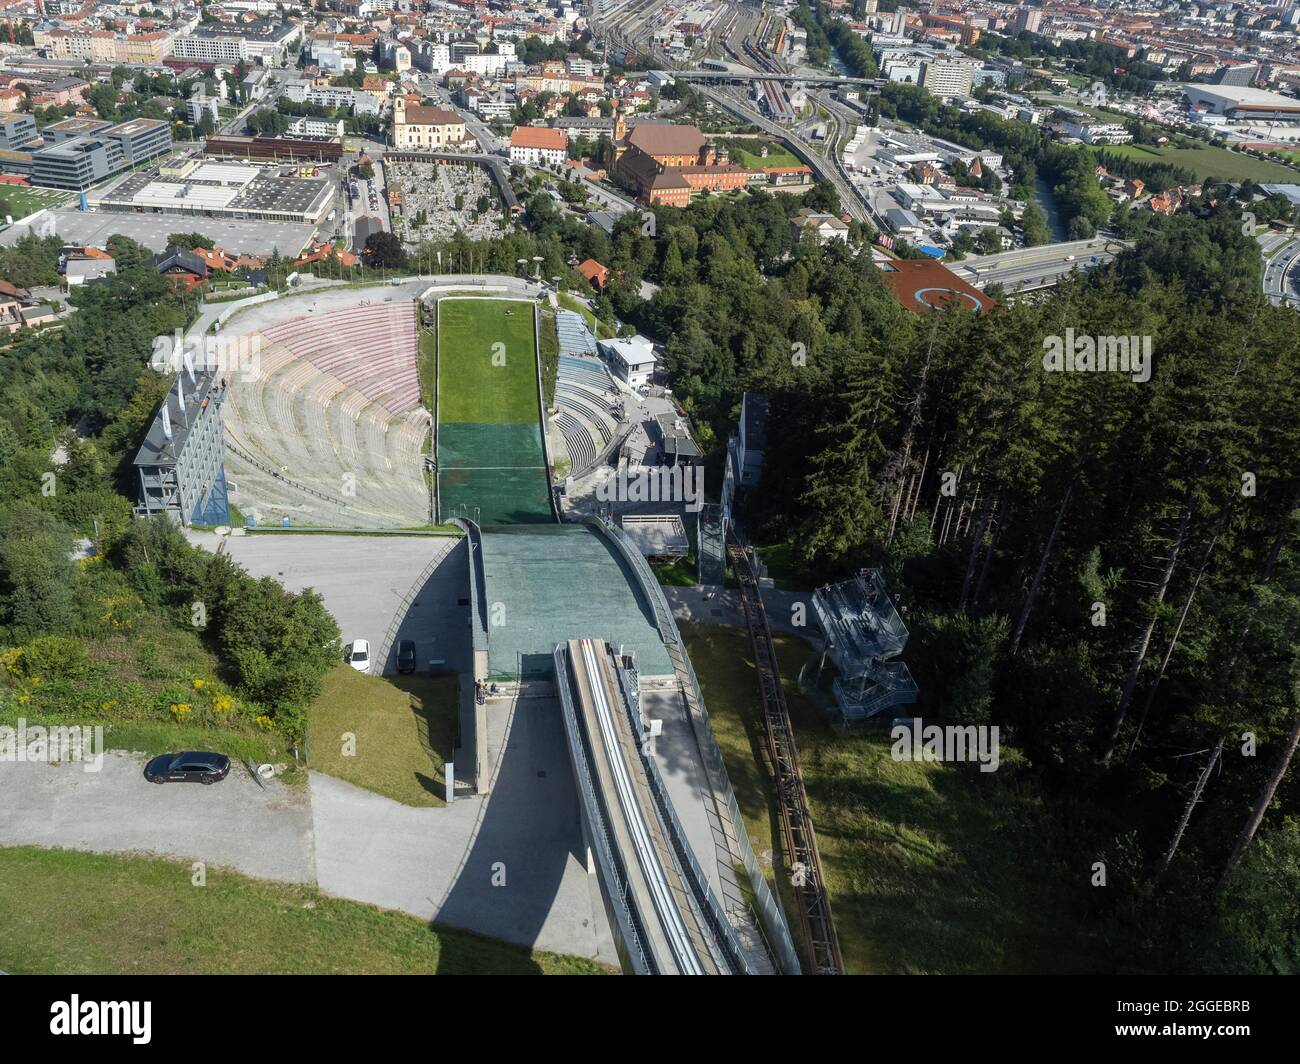 View from the Bergisel ski jump down to the stadium, behind it the city of Insbruck, on the horizon the Nordkette, Innsbruck, Tyrol, Austria Stock Photo